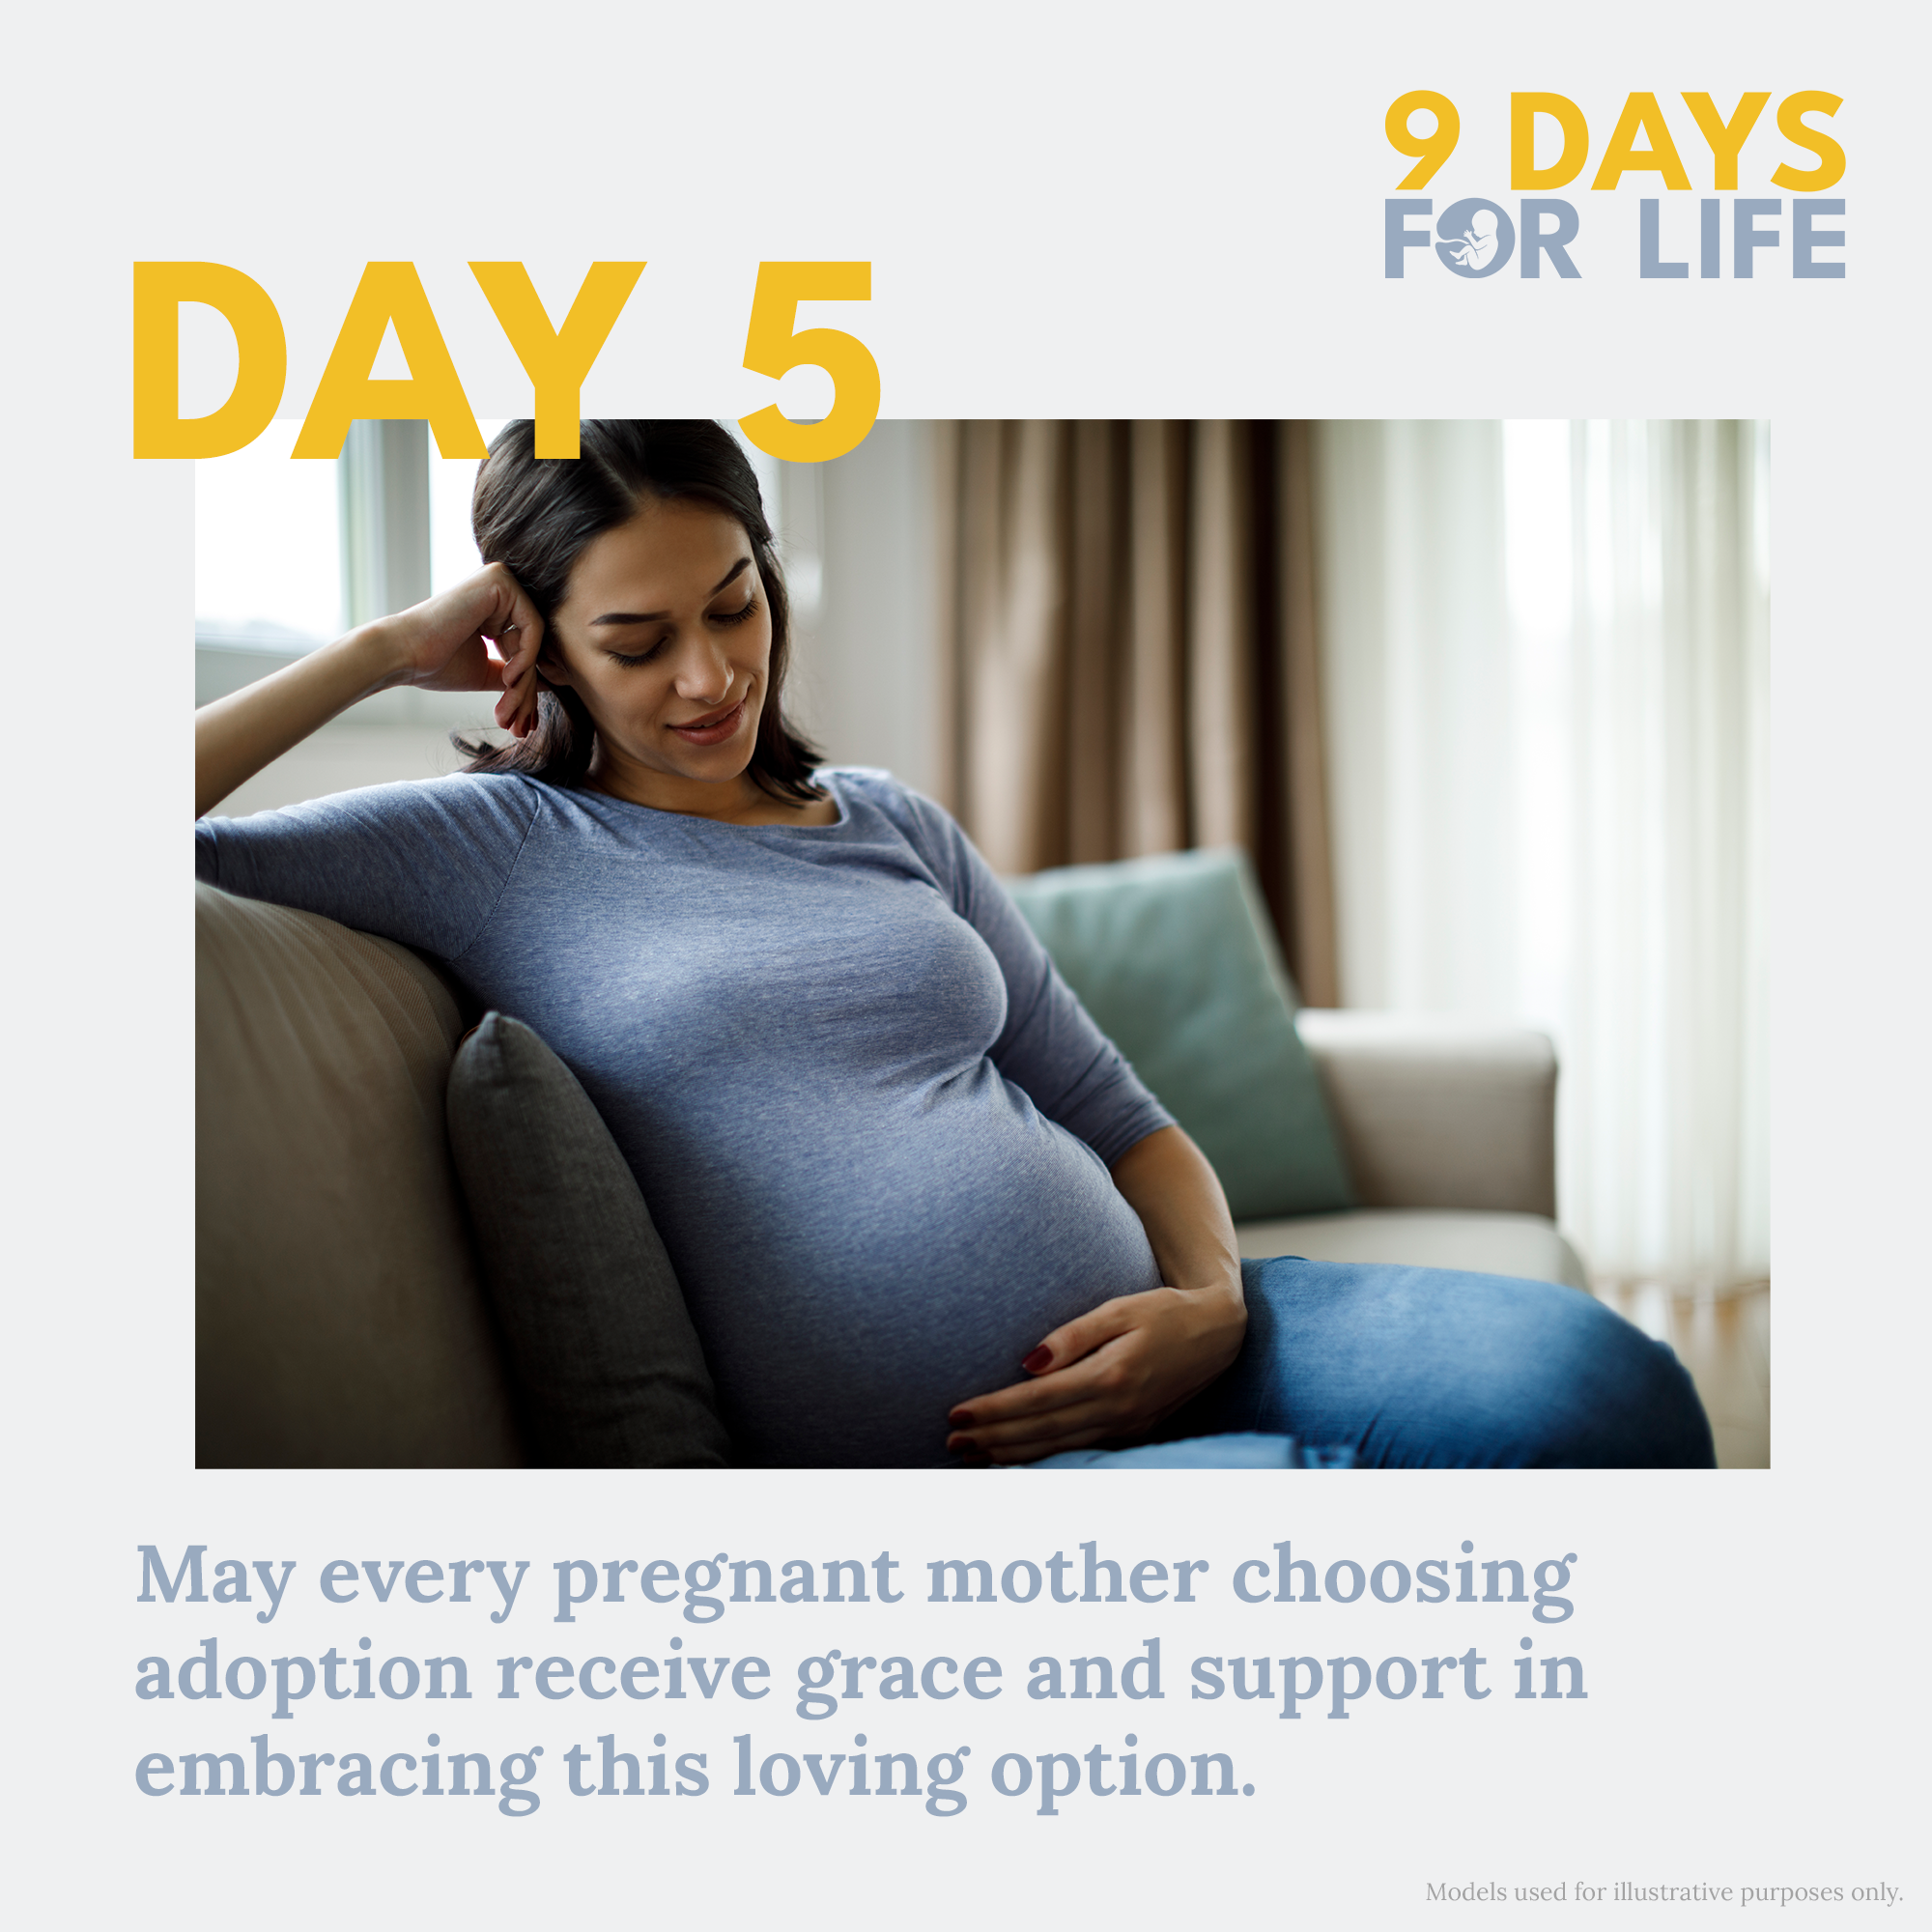 Day 5 - Nine Days for Life - Pregnant woman sitting on couch